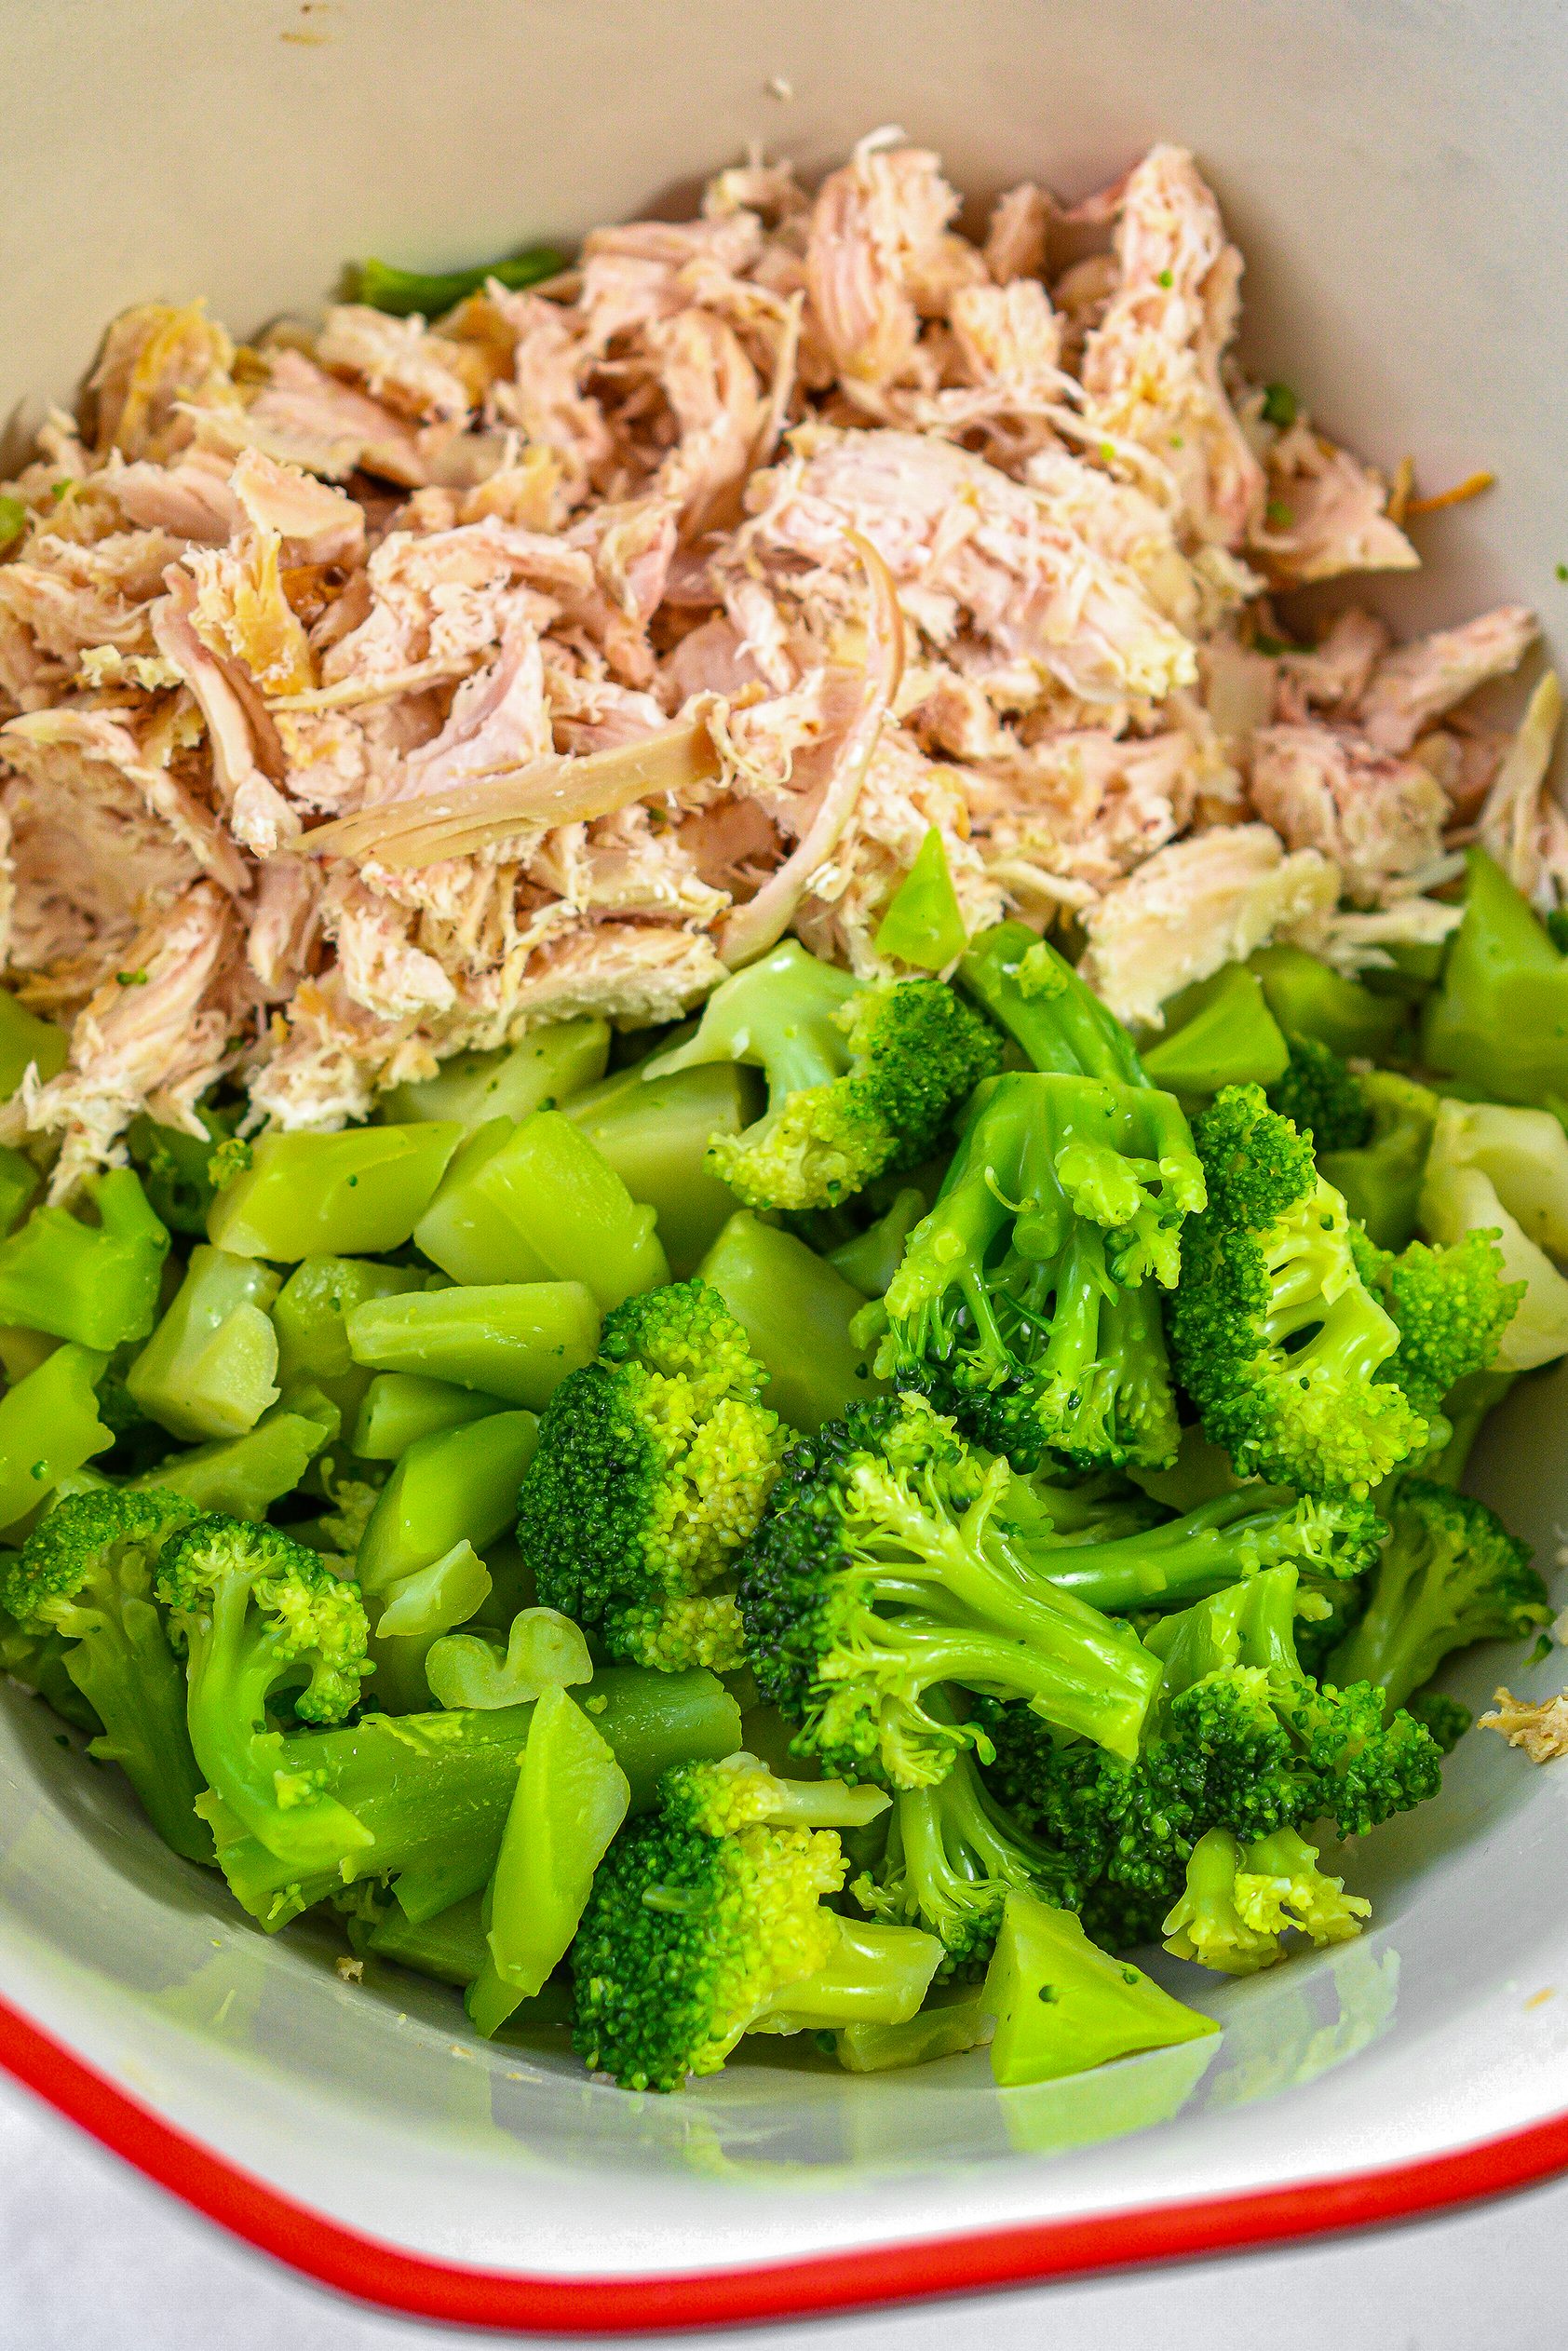 In a large mixing bowl, combine the shredded chicken and broccoli.